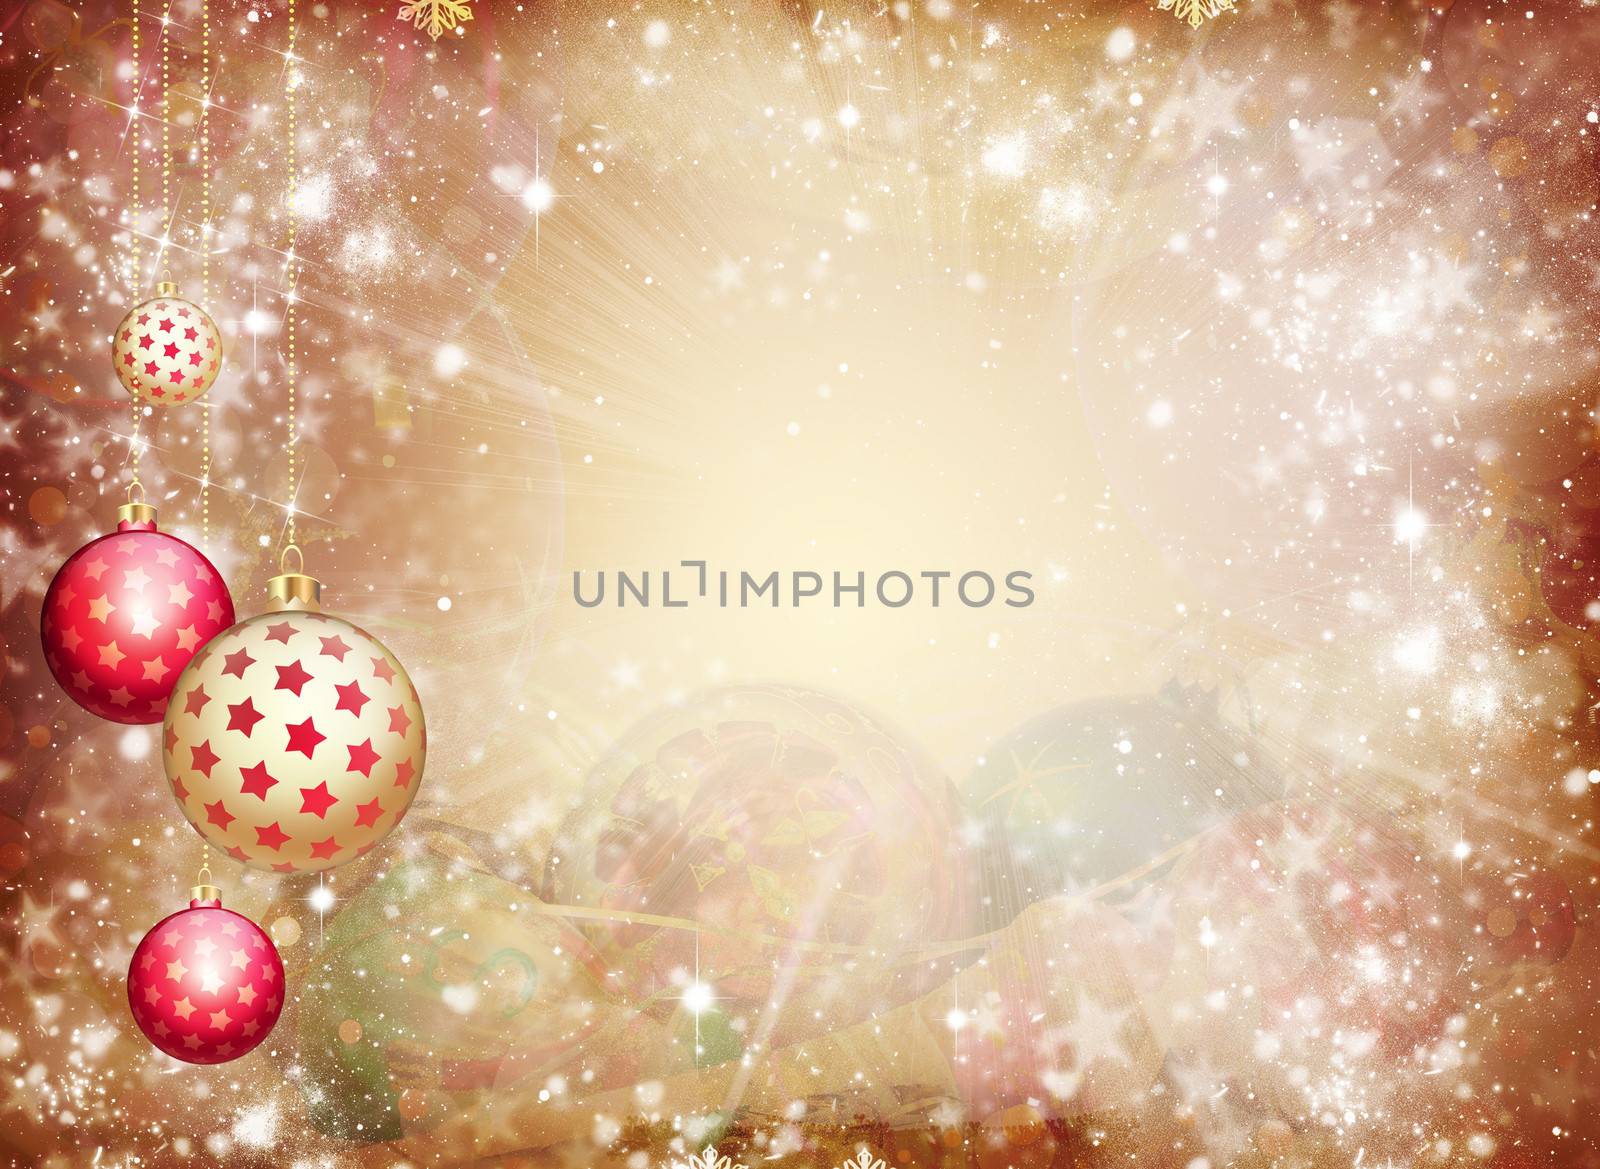 New Year's background. Christmas balls and snowflakes on a abstract background